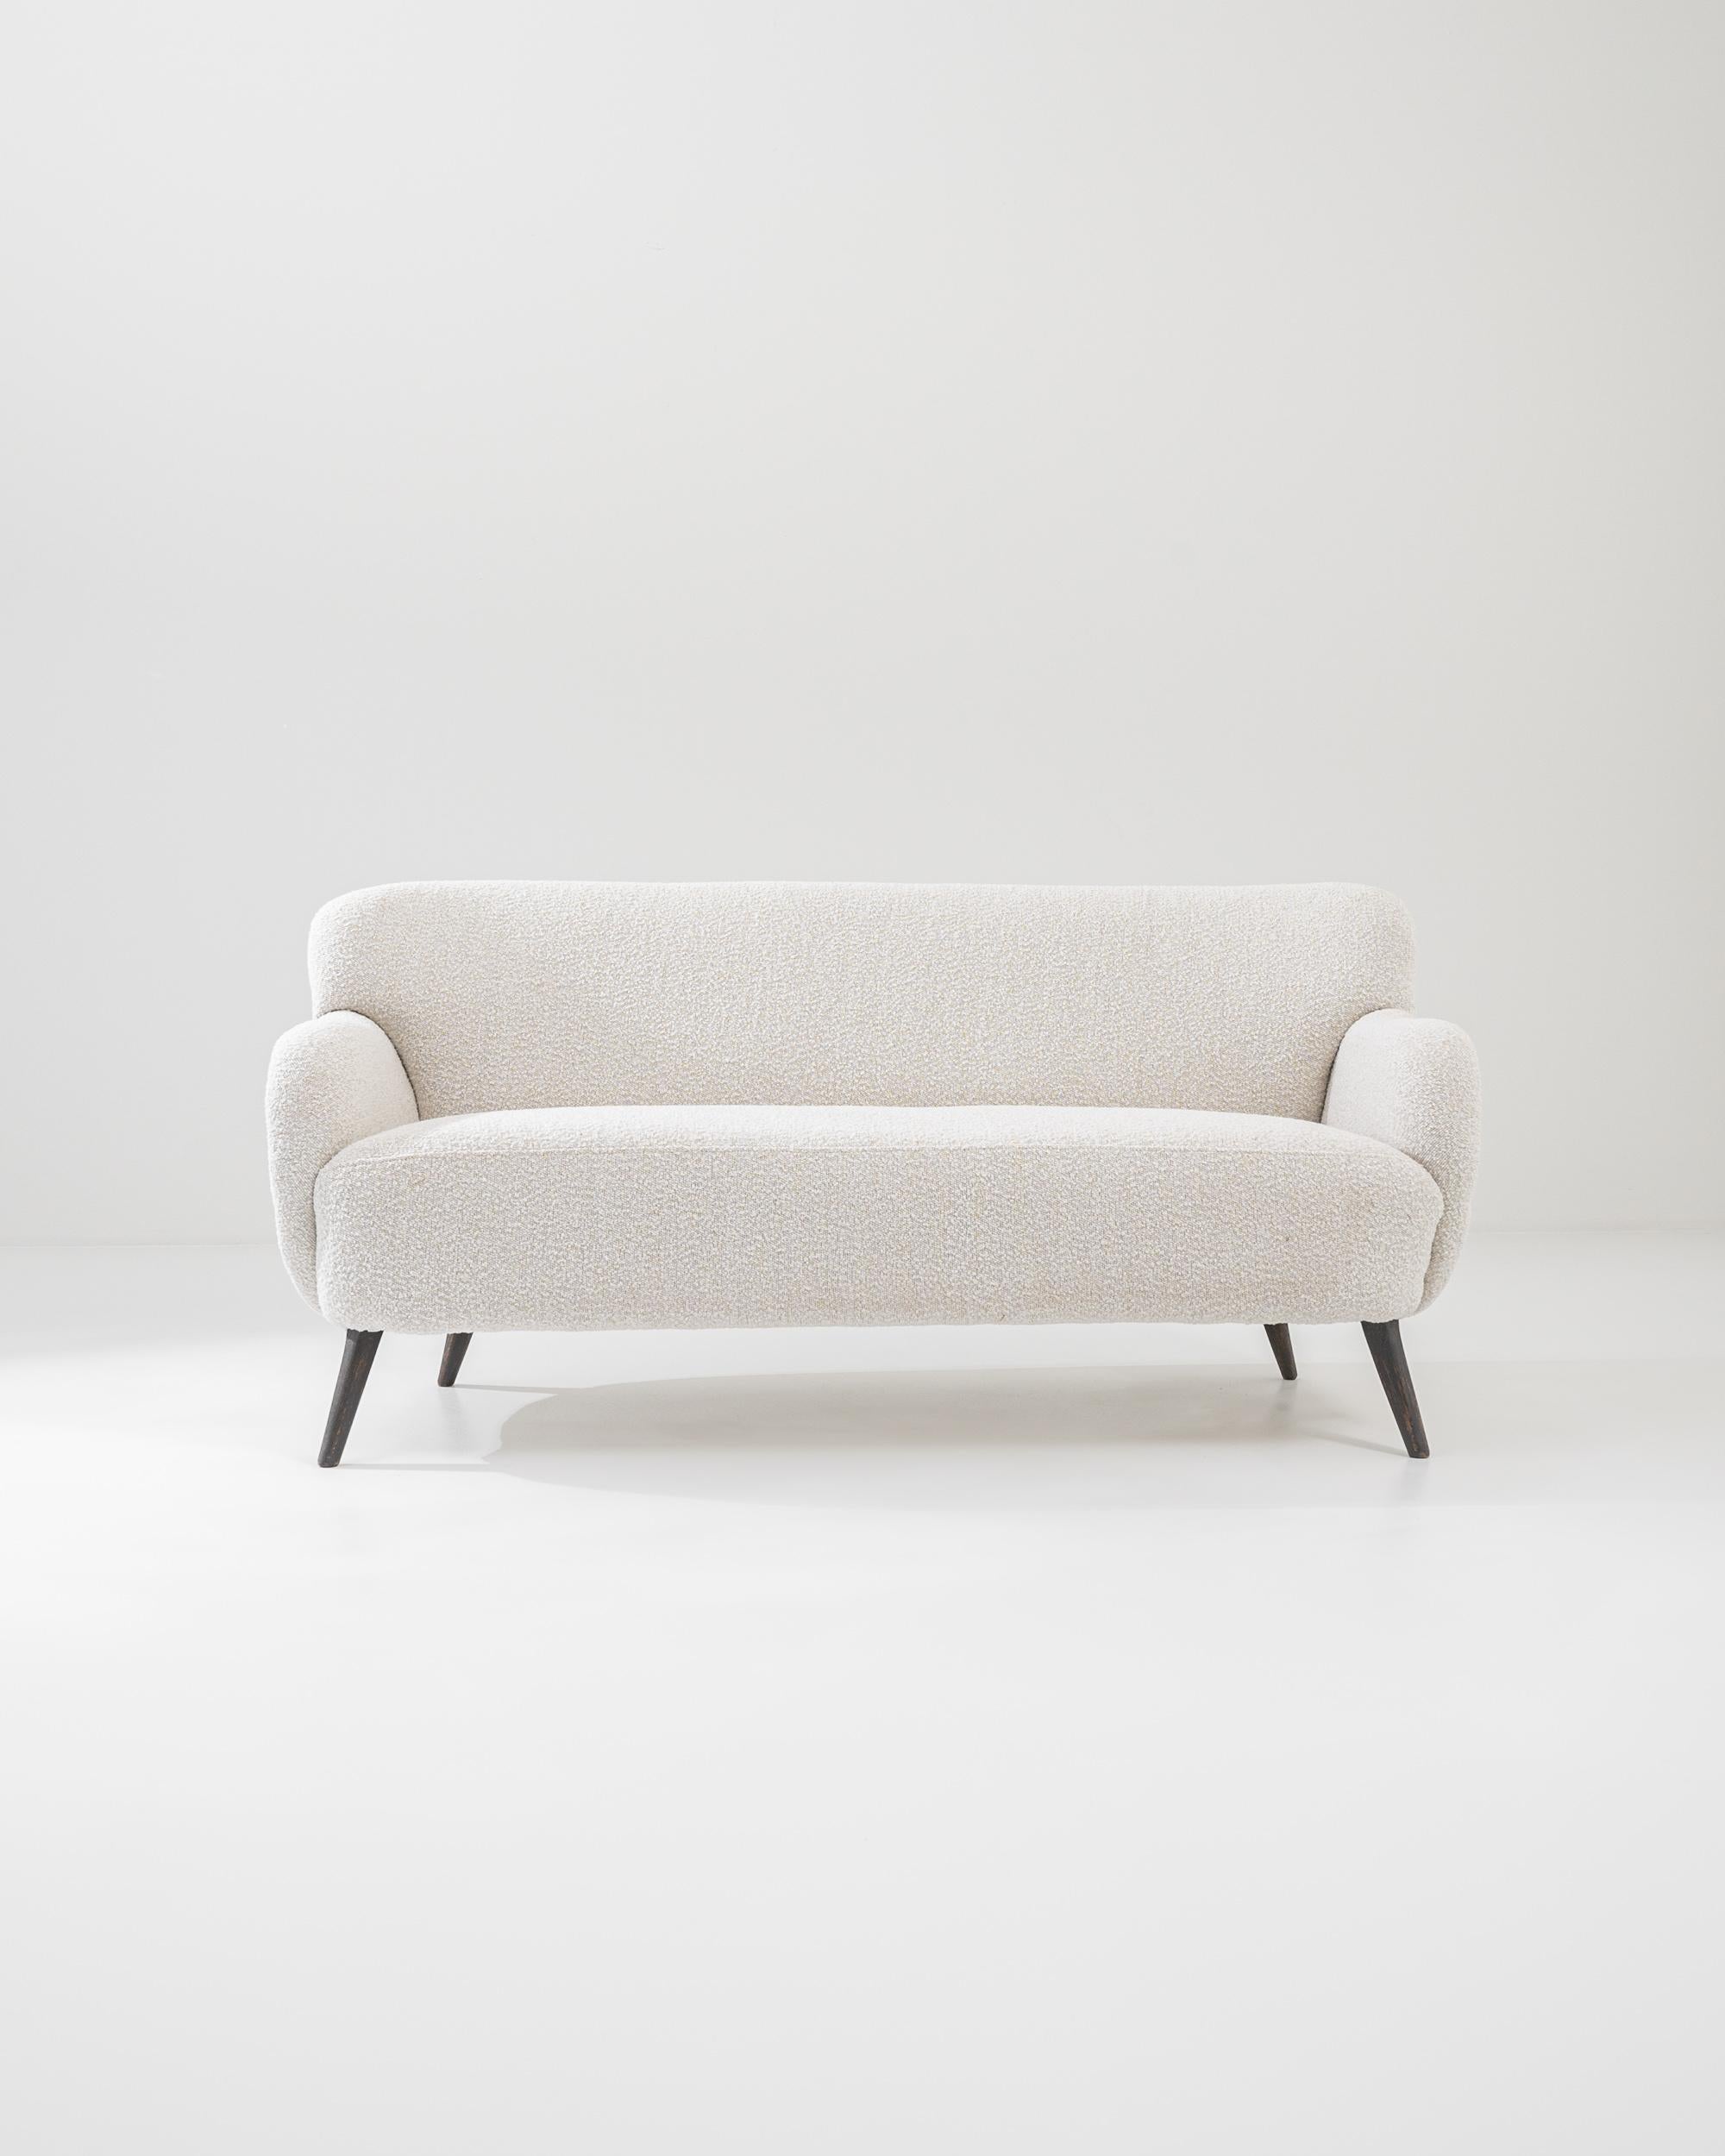 Effortlessly simple, this 1960s sofa embodies the homey elegance of Danish Modern furniture. The curves of the cushioned seat, backrest and armrests have a cloud-like softness, accentuated by the textural white boucle of the upholstery. Tapered